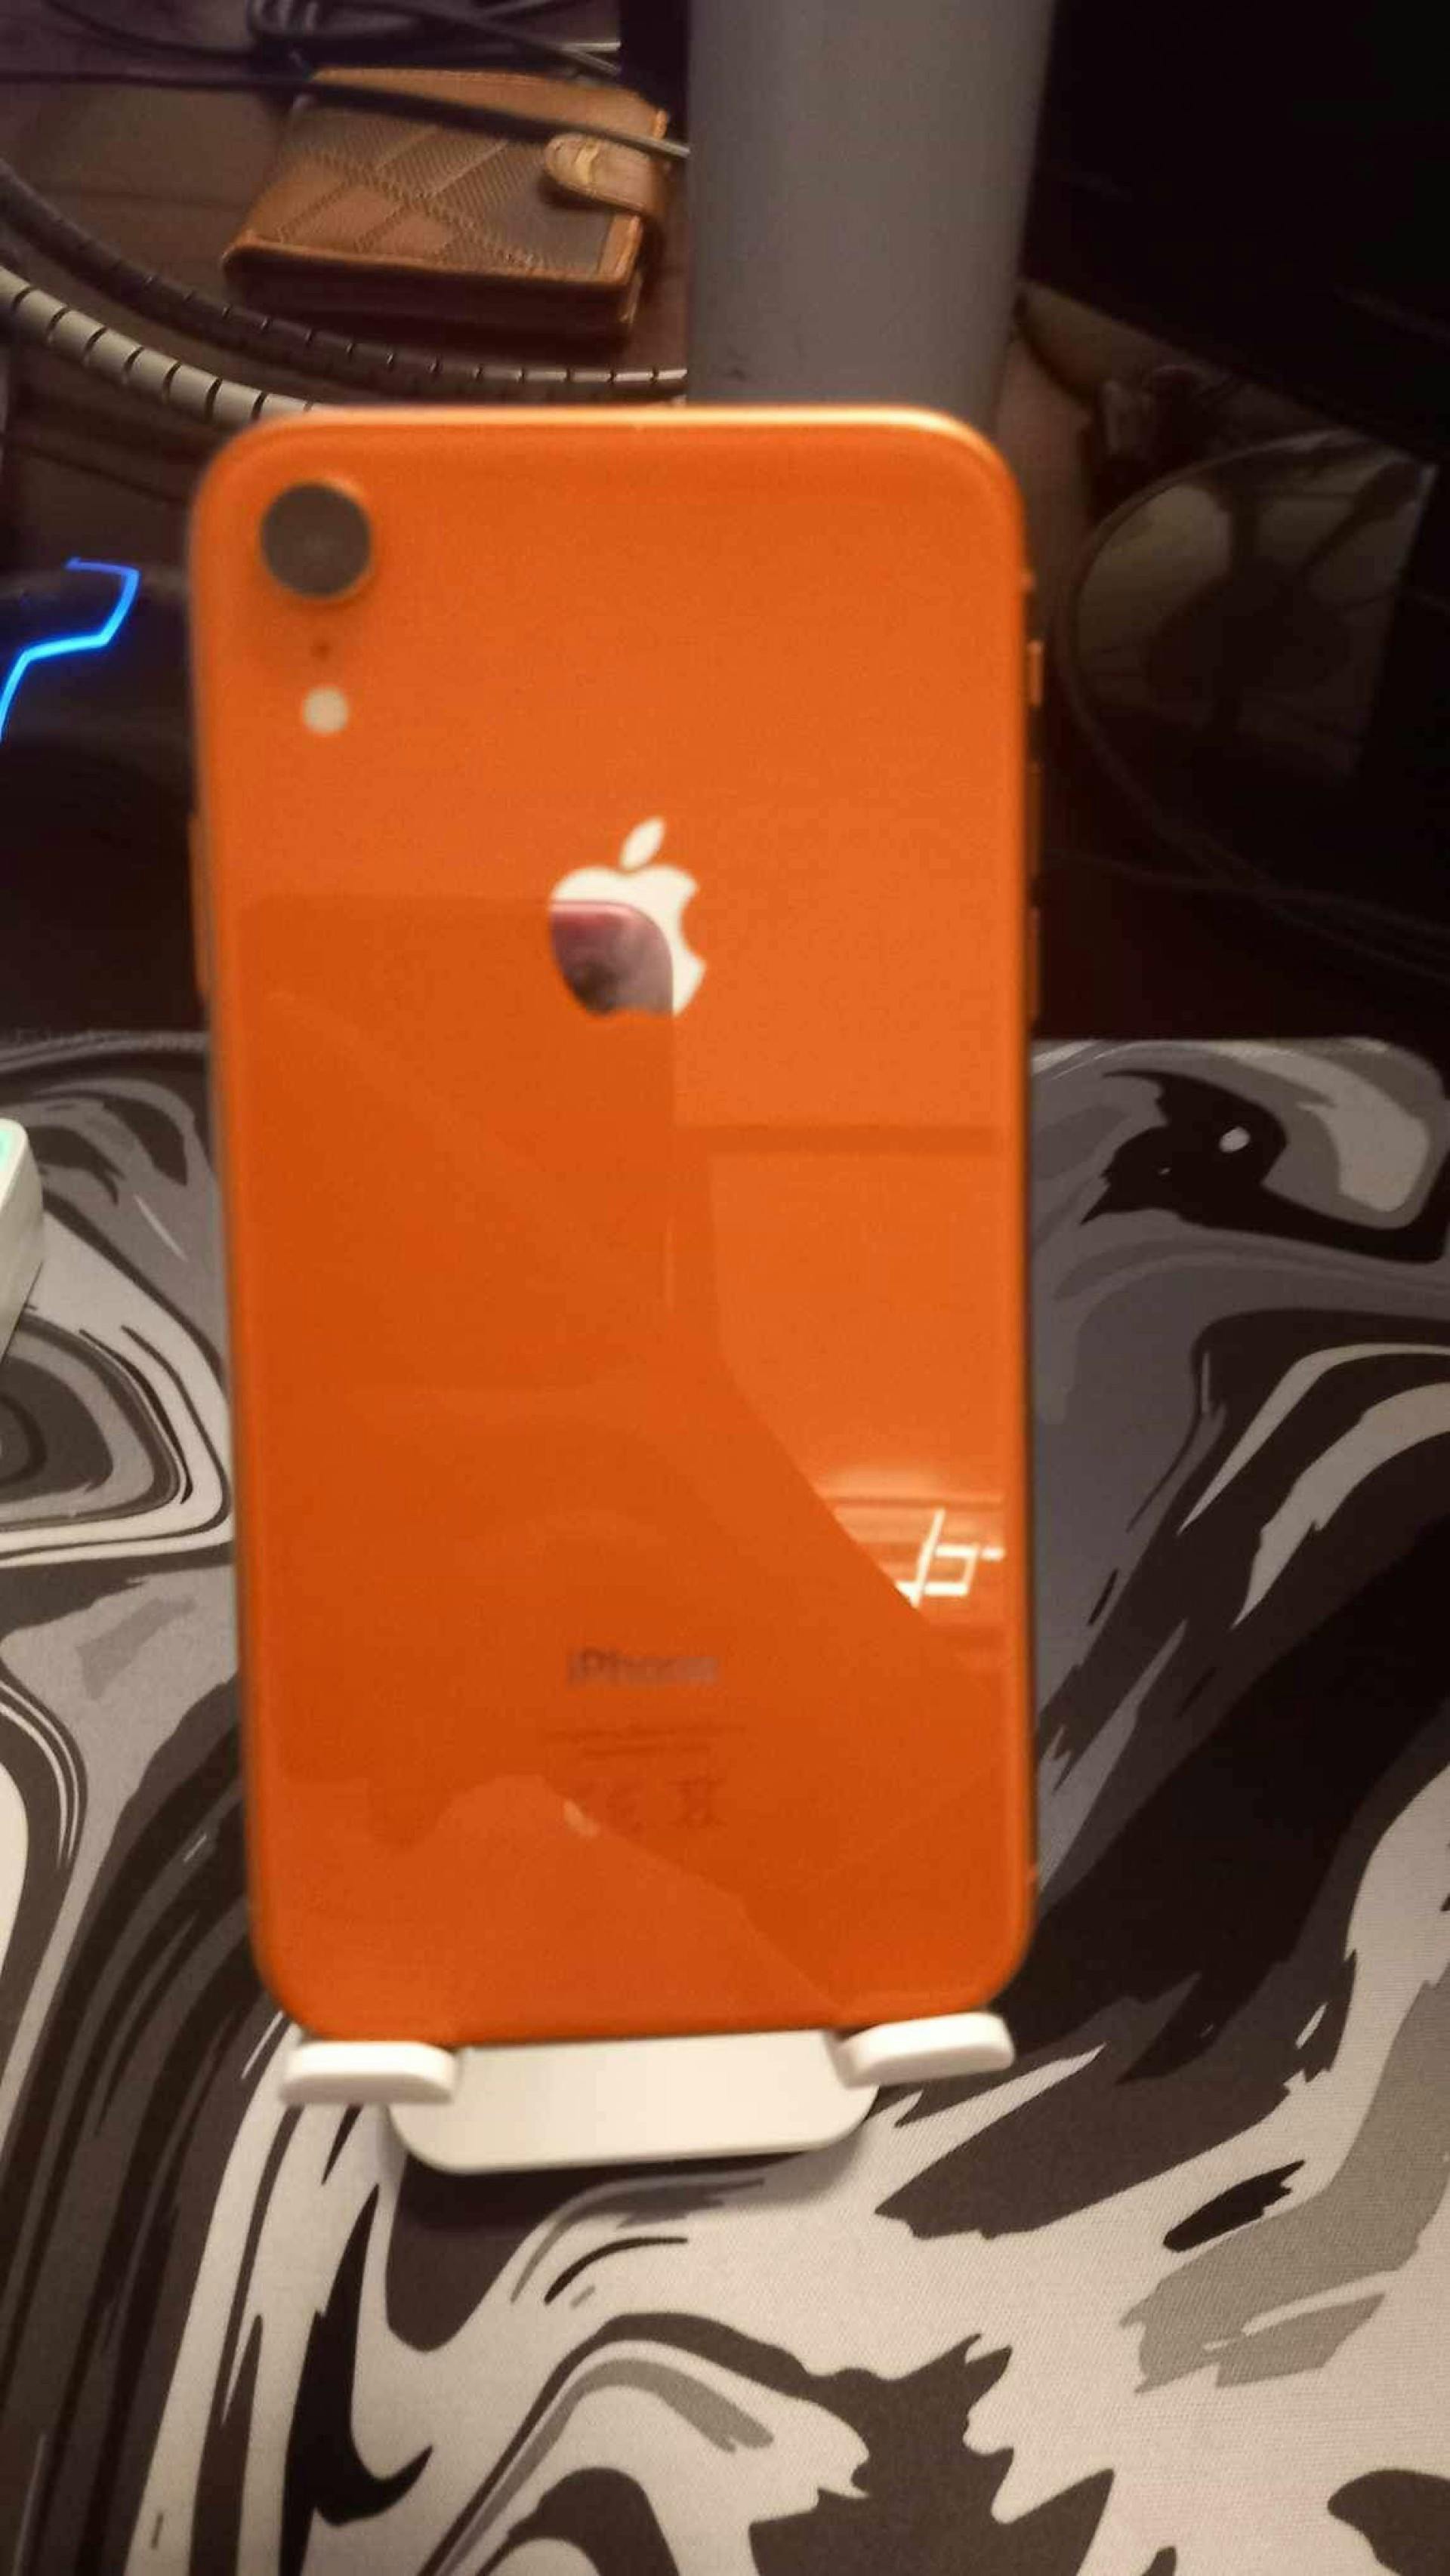 Apple iPhone XR 256GB Red